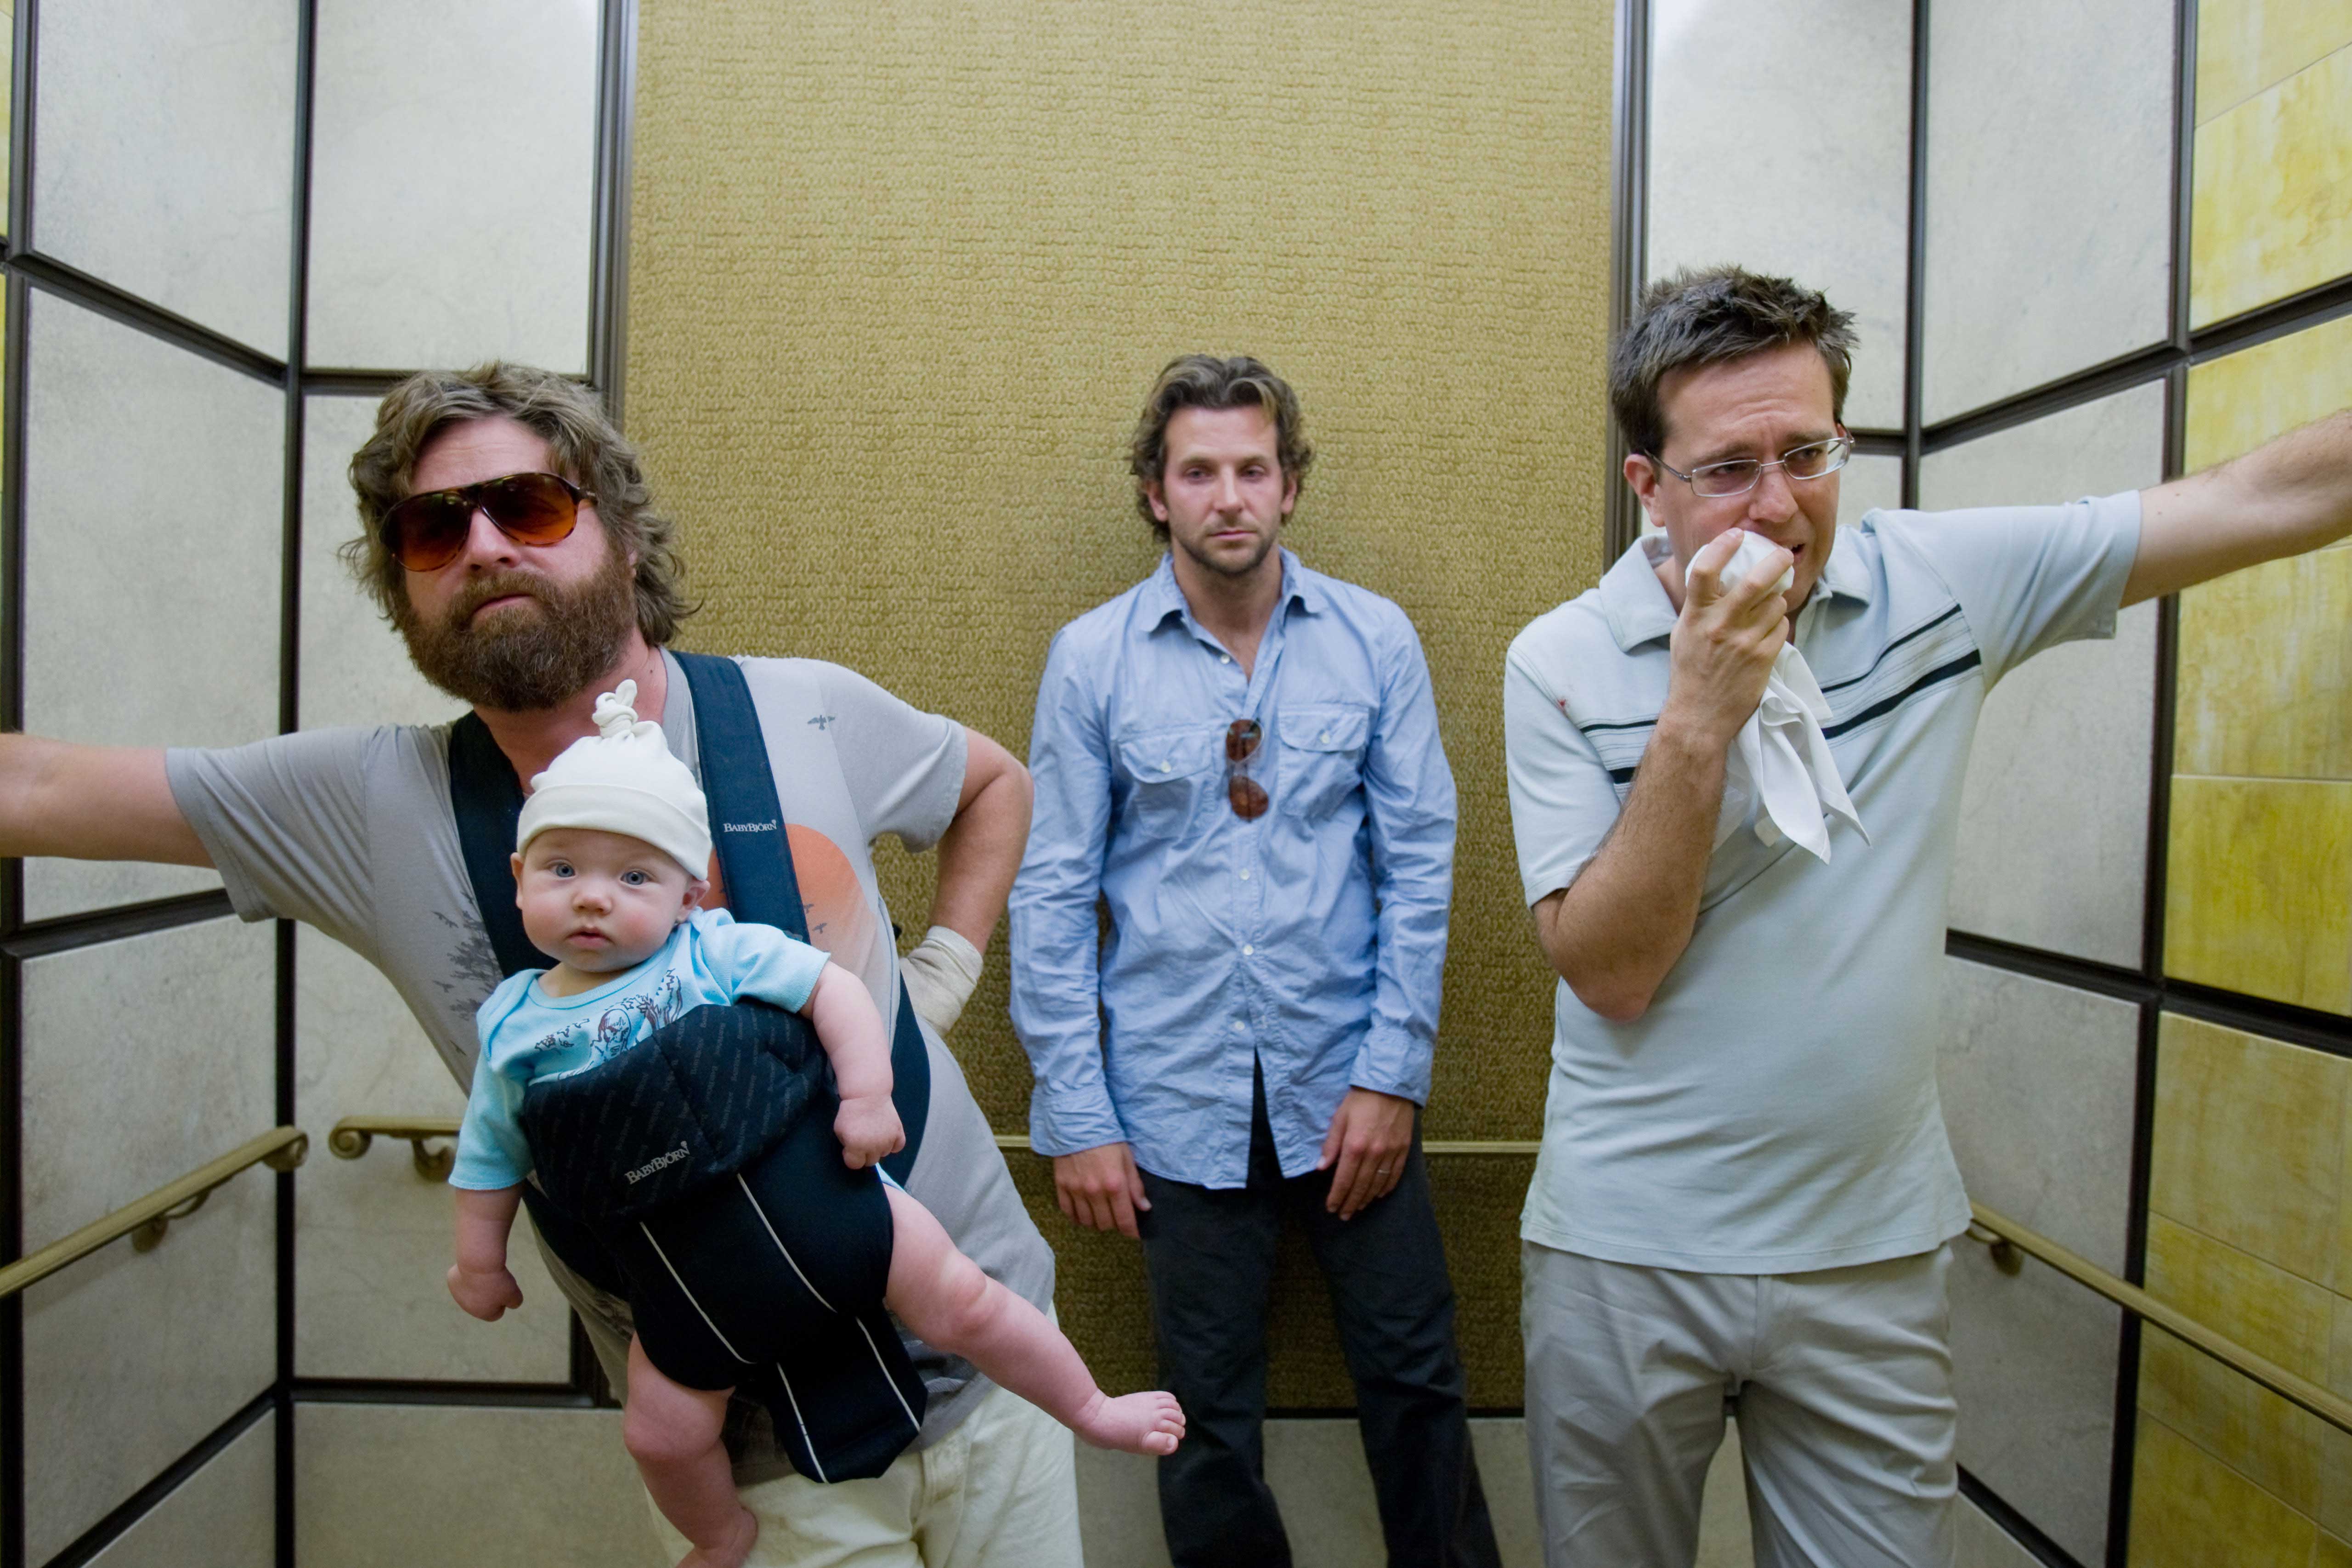 Zach Galifianakis, Bradley Cooper and Ed Helms confront the cold light of day in 'The Hangover'